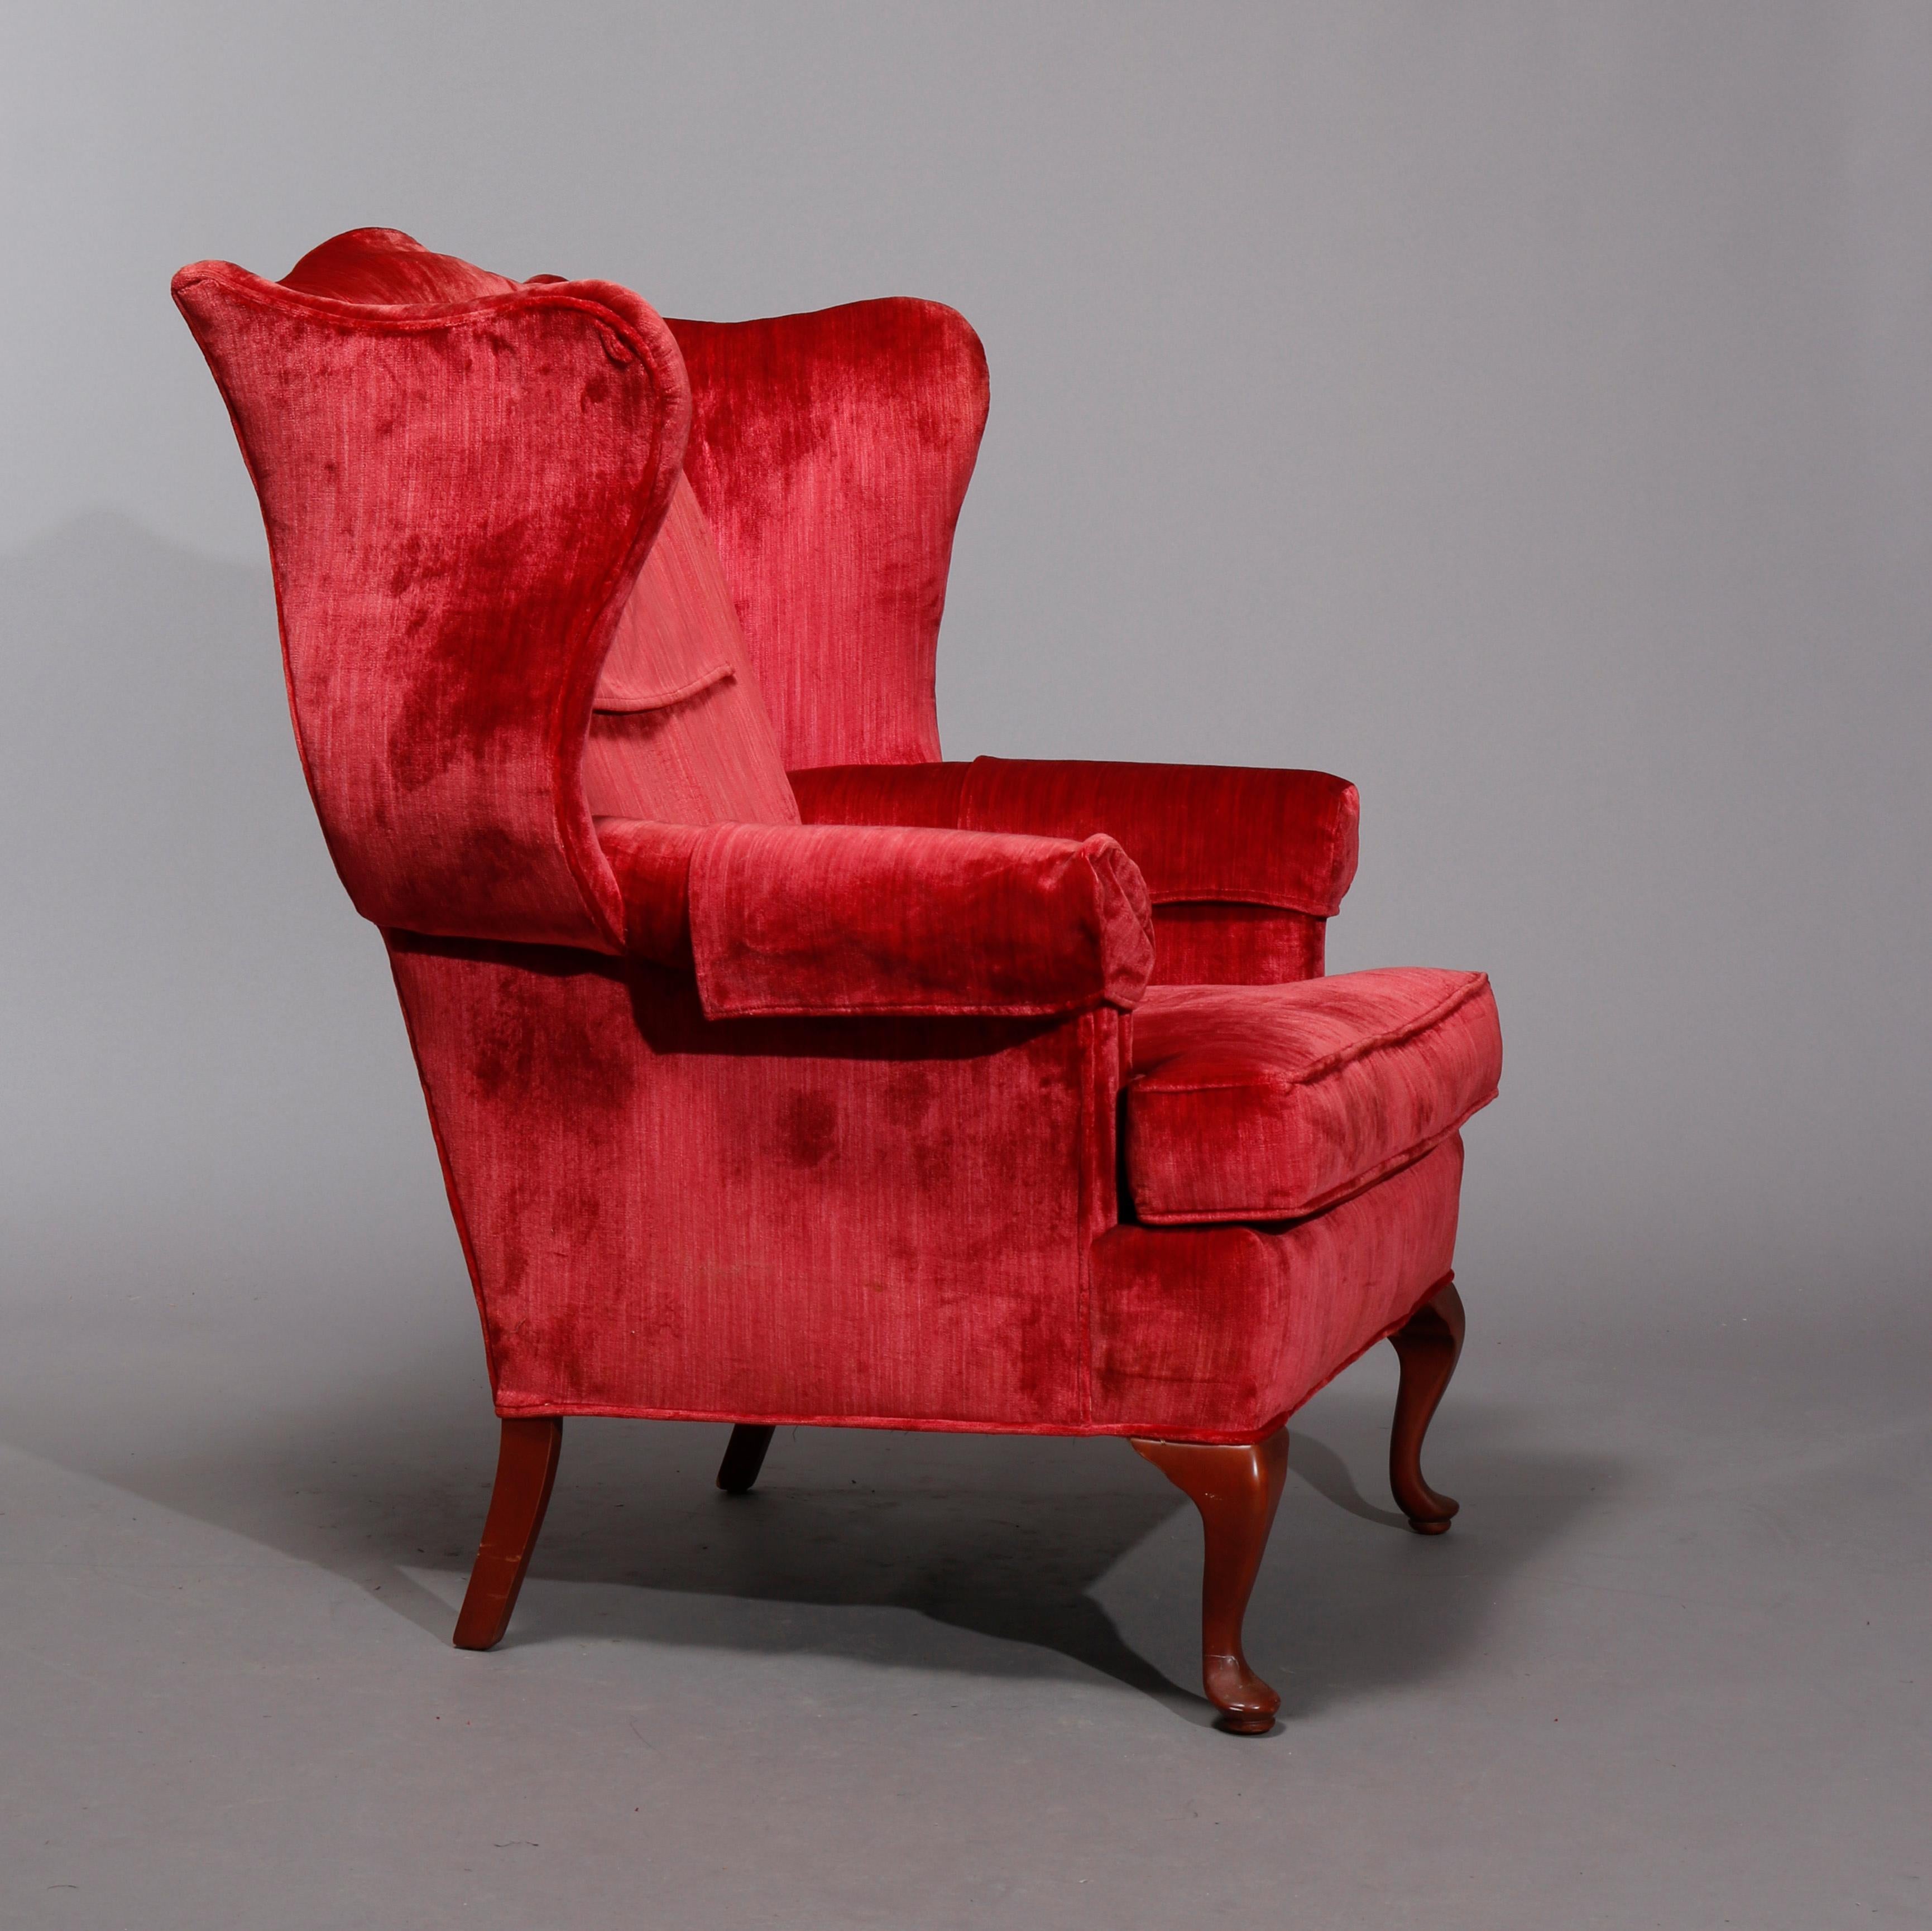 An antique pair of fireside wingback chairs offers shaped backs and scroll form arms with red crused velvet upholstery raised on Queen Anne style mahogany legs, 20th century

Measures: 44.5